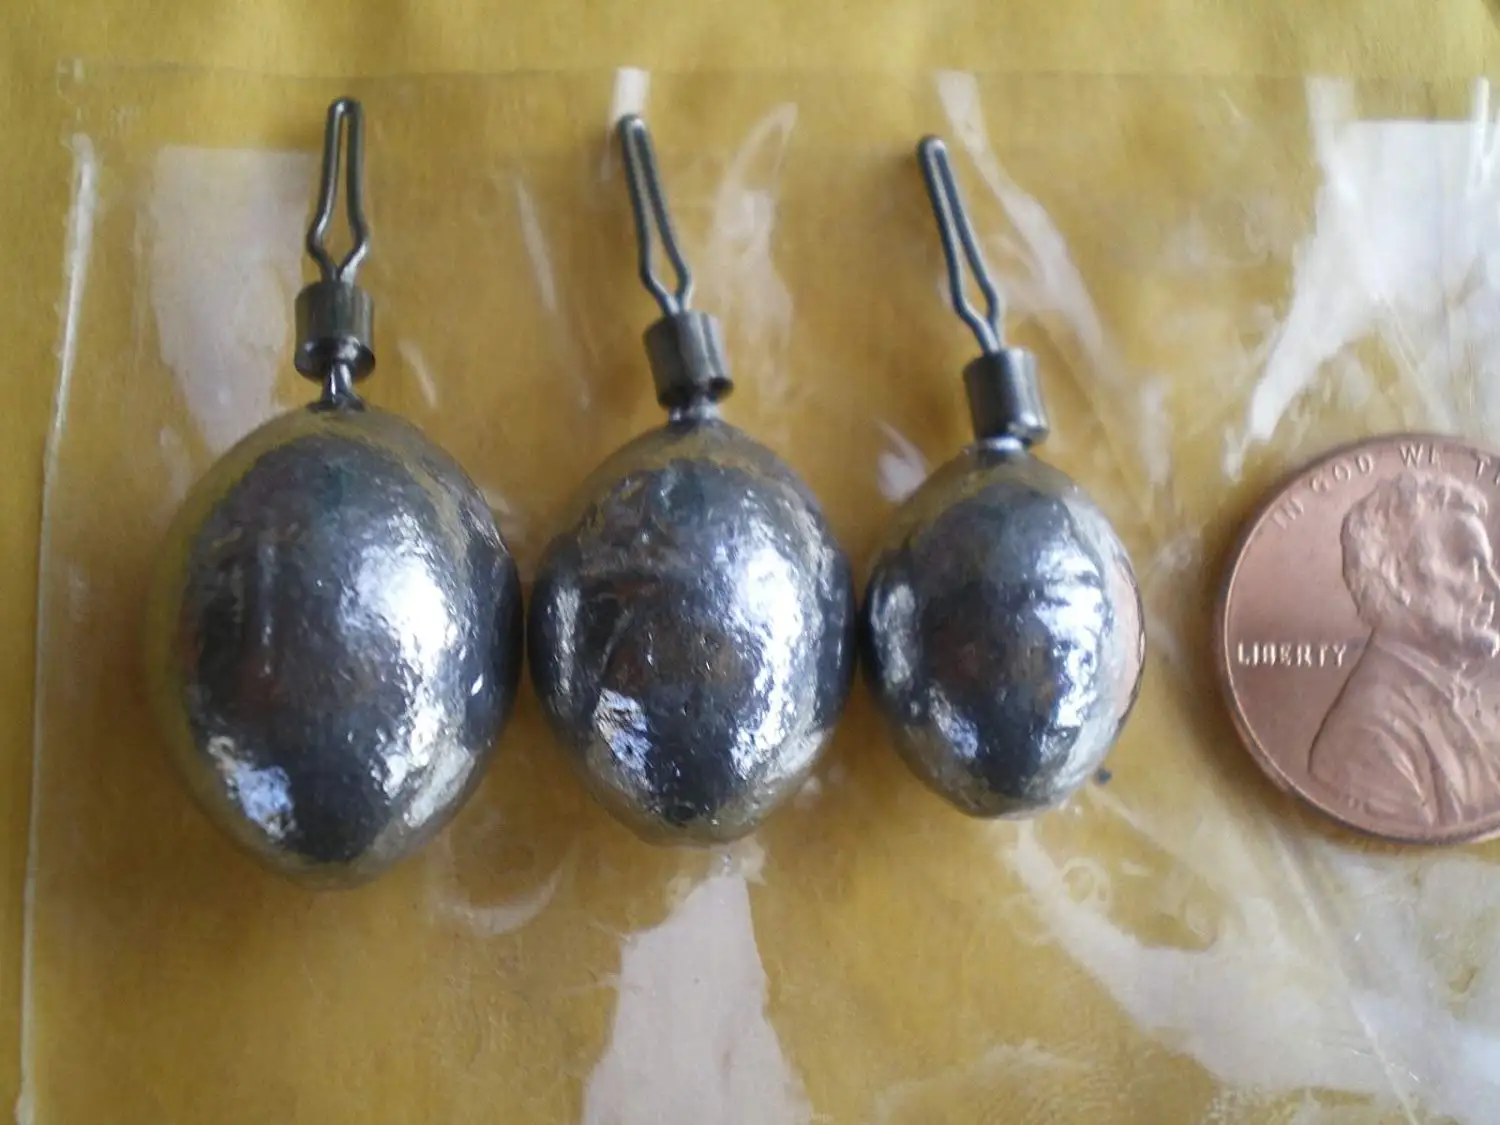 4 oz and 5 oz sinkers Free Shipping Bank Sinker Combo Package Package of 3 oz